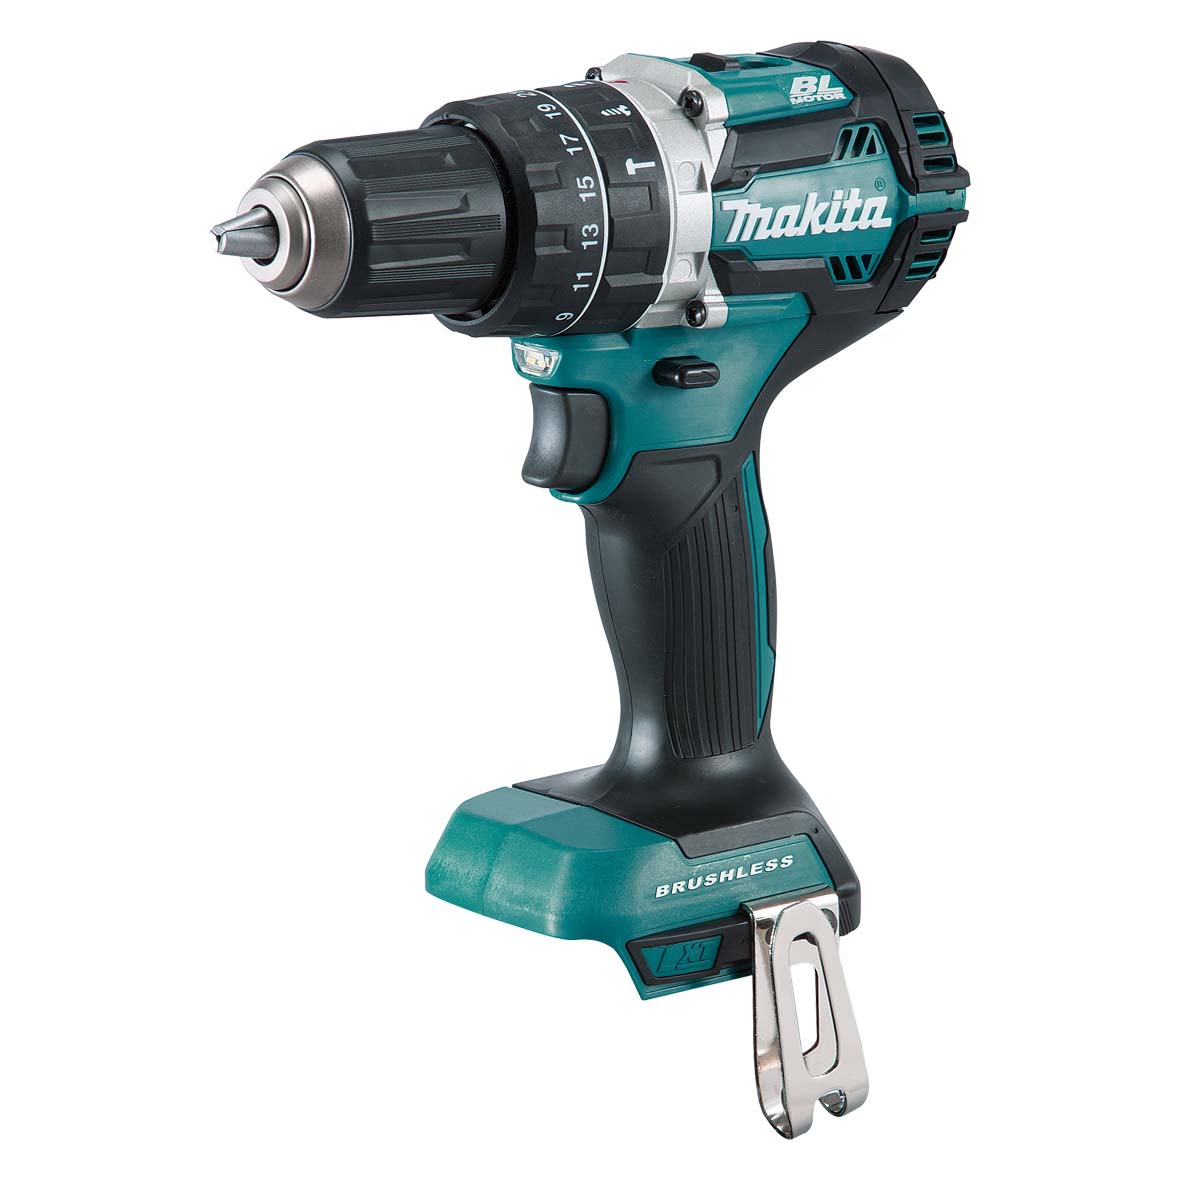 18V Brushless Heavy Duty Compact Hammer Driver Drill Bare (Tool Only) DHP484Z by Makita